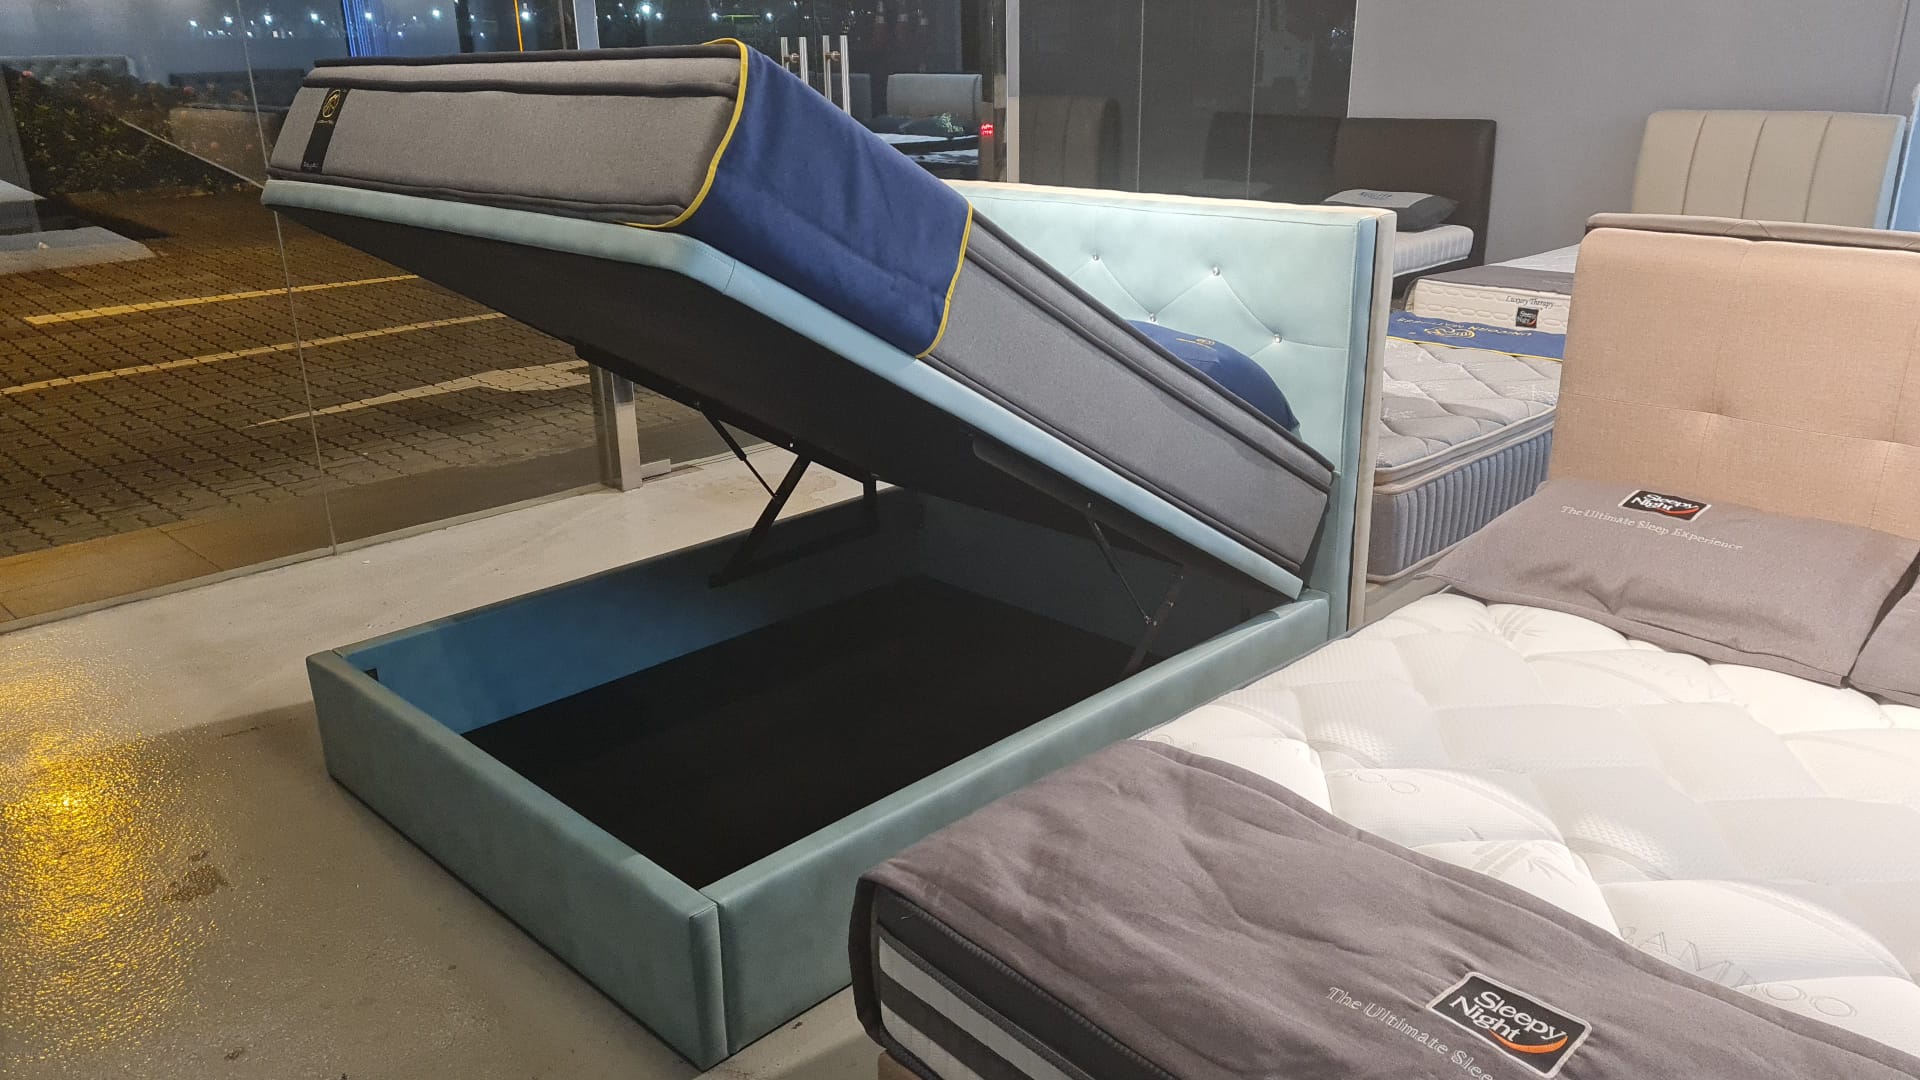 Lobang: Furniture Store Offering $88 Storage Beds When You Purchase A Mattress from 1 - 12 Mar 23 - 7